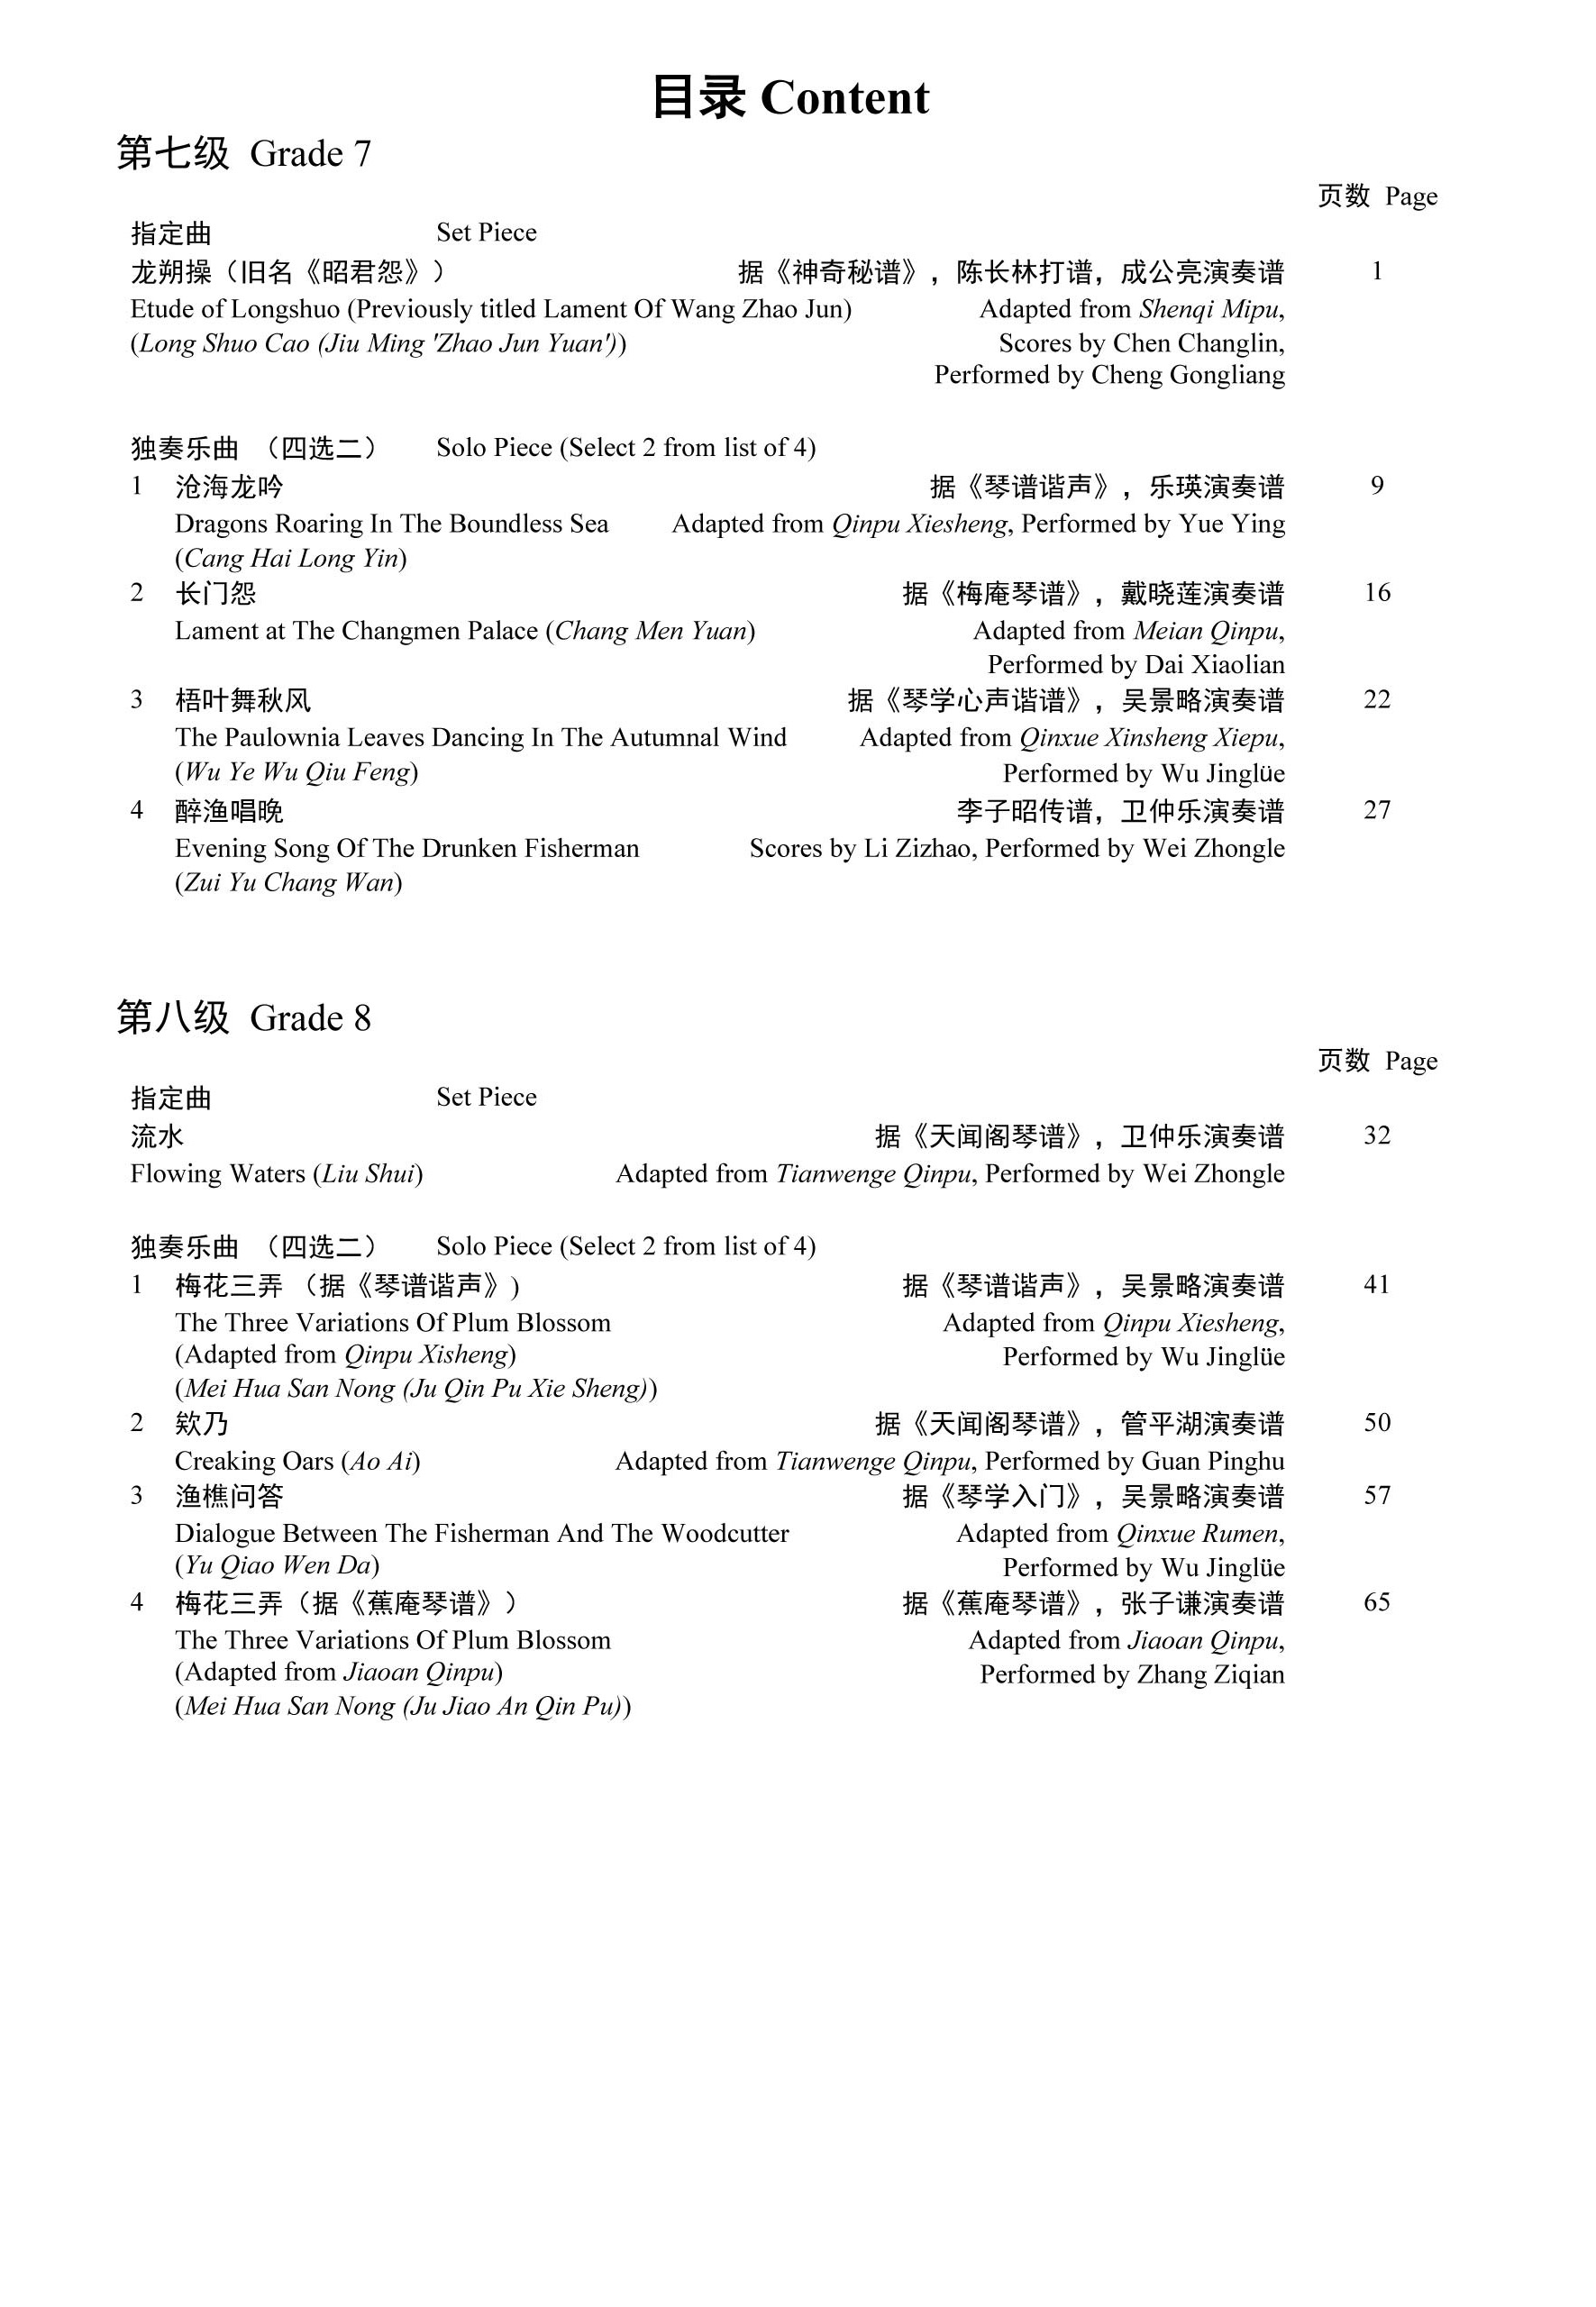 Guqin Grading Examination Book by Teng (Intermediate Grade 7-8) Content Page